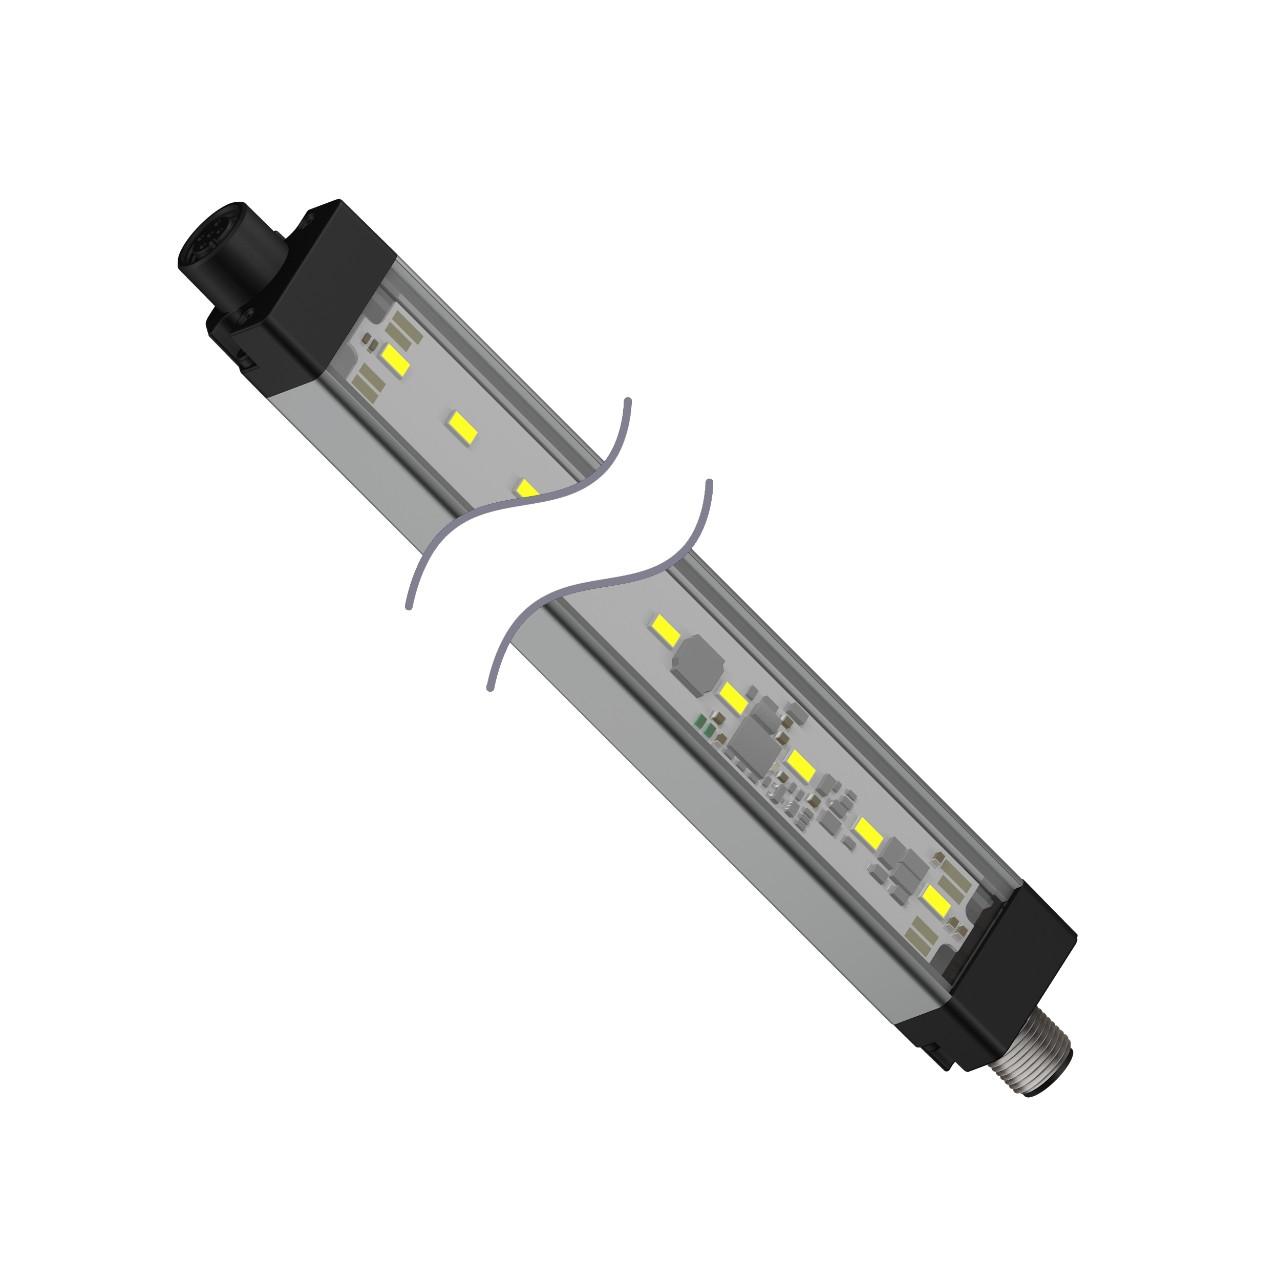 Banner WLS28-2CW430DXQ Banner Engineering WLS28-2CW430DXQ is a cascadable LED industrial strip light/bar designed for task lighting applications. It features a diffused plastic window for 1-color Cool White (W) LED illumination and operates on a supply voltage range of 12Vdc to 30Vdc, with a nominal voltage of 24Vdc. The dimensions of this product are L430mm x W28mm, and it is constructed with a polycarbonate (PC) window and an aluminium housing. This linear light strip is pre-equipped with a 4-pin M12 Euro-style QD connector for connectivity. It has an IP50 degree of protection, making it suitable for surface or wall mounting. The ambient air temperature for operation ranges from -40°C to +70°C. Additionally, it includes 1 x digital input (12-30Vdc) for color control and offers a luminous flux of 900 lm (lumens).